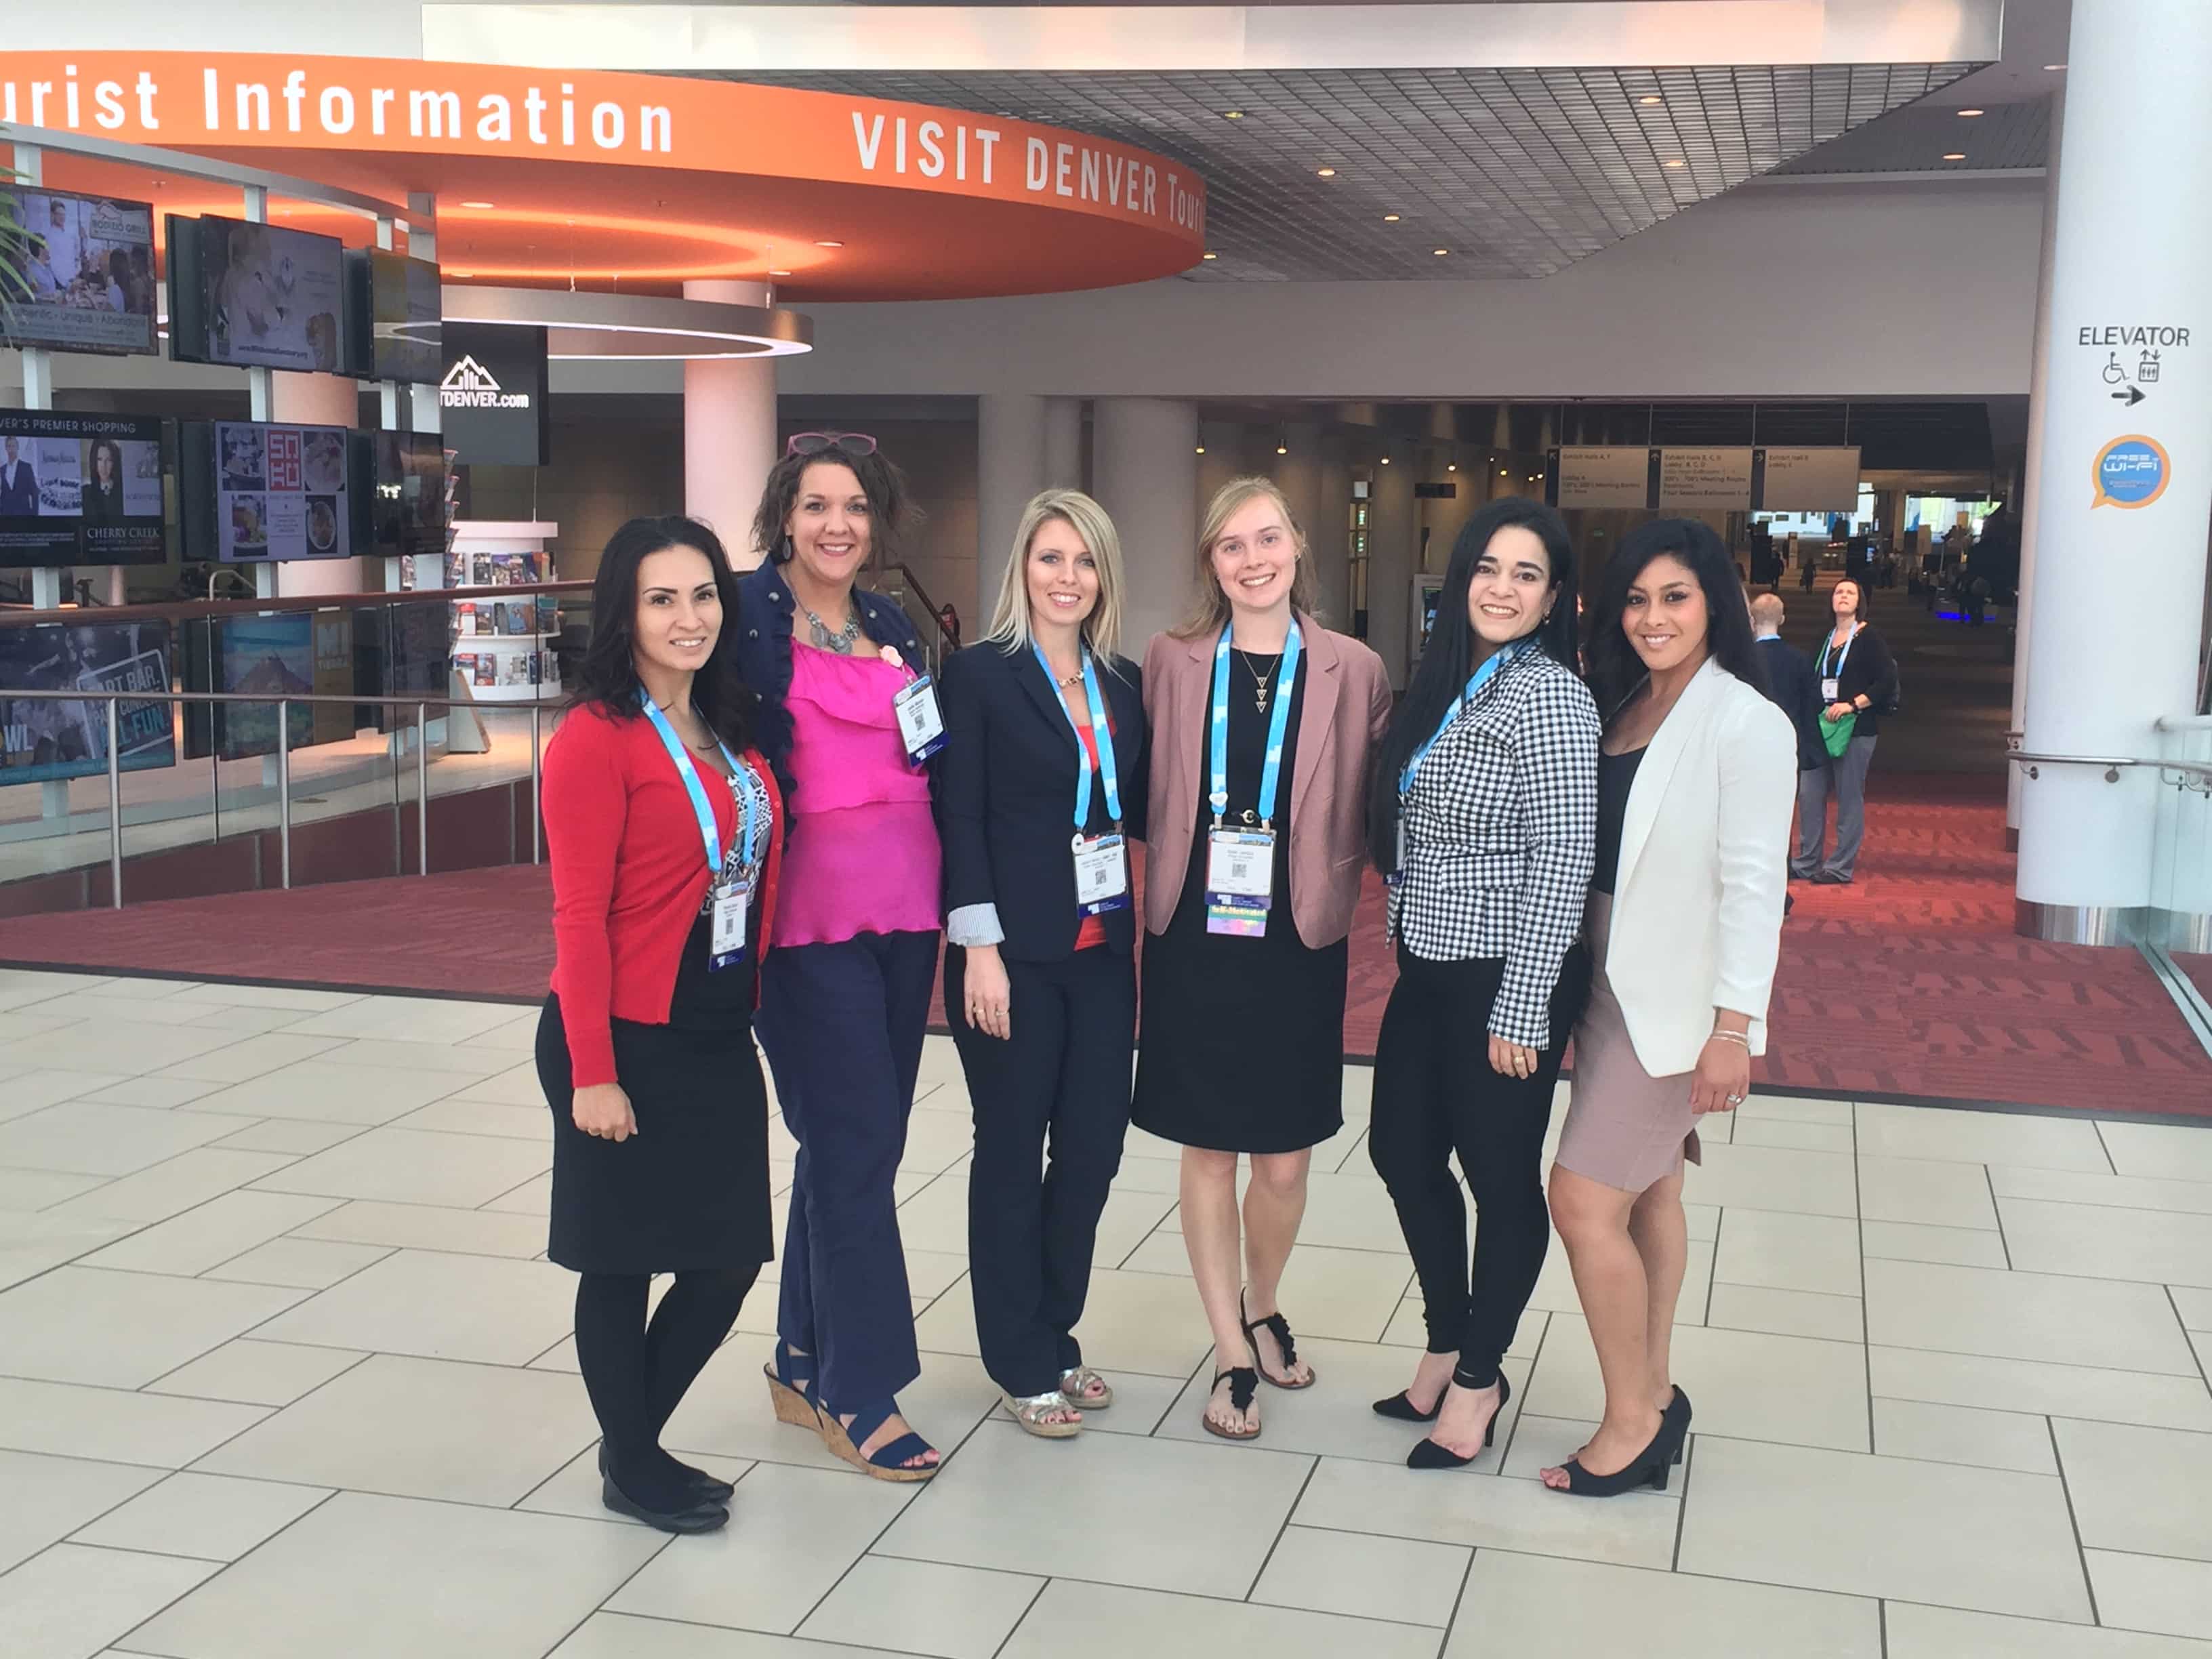 Follow-up on Lakeland Nuclear Medicine Technology Students Who Attended National Conference